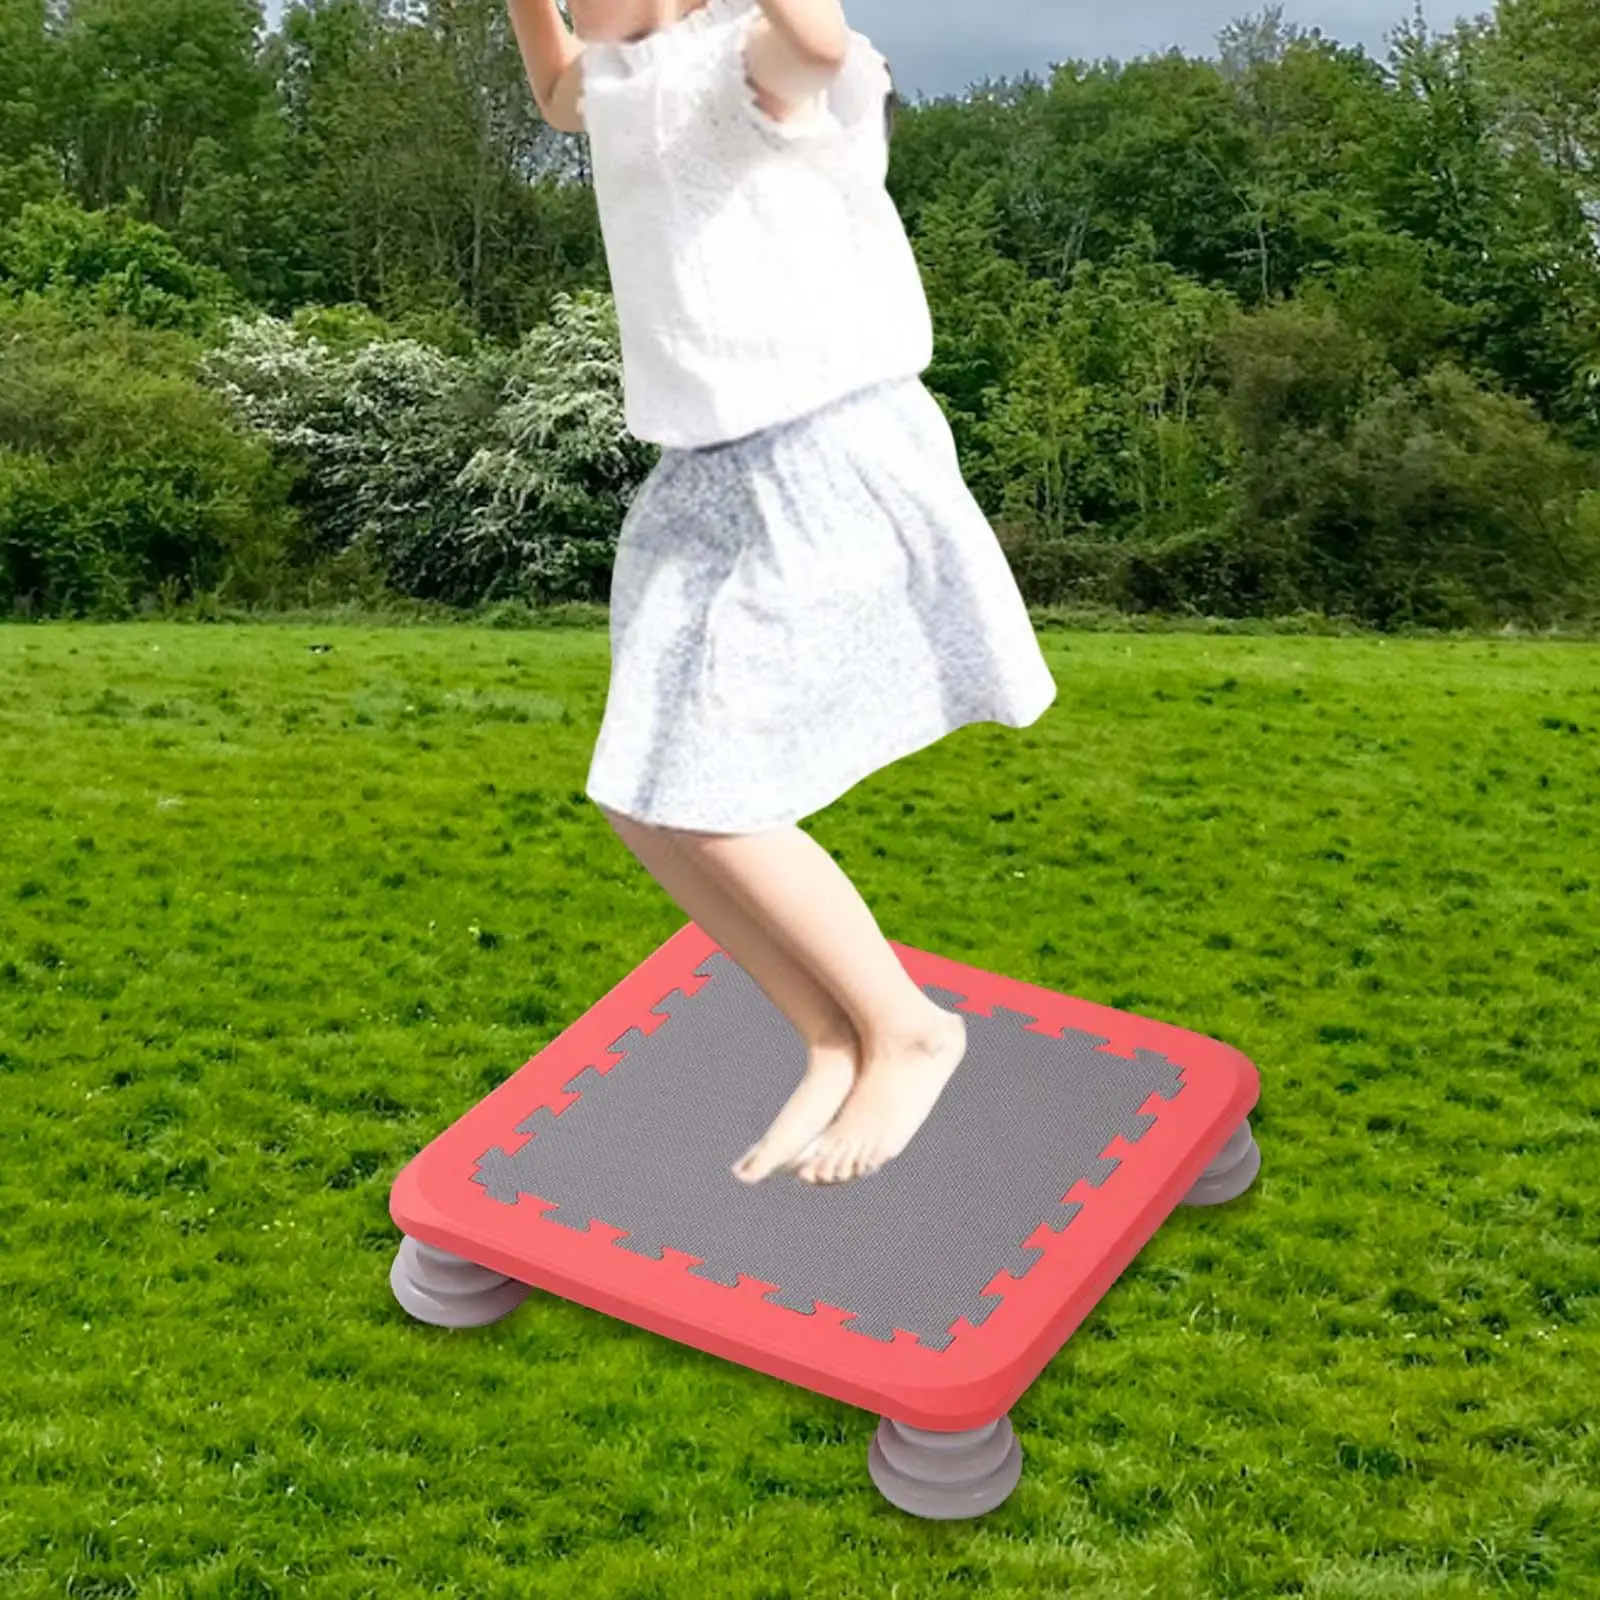 Mini Kids Trampoline Fitness Jump Sports Exercise Workout Toy Portable Bouncing Bed for Boys Girls Nursery Home Indoor School